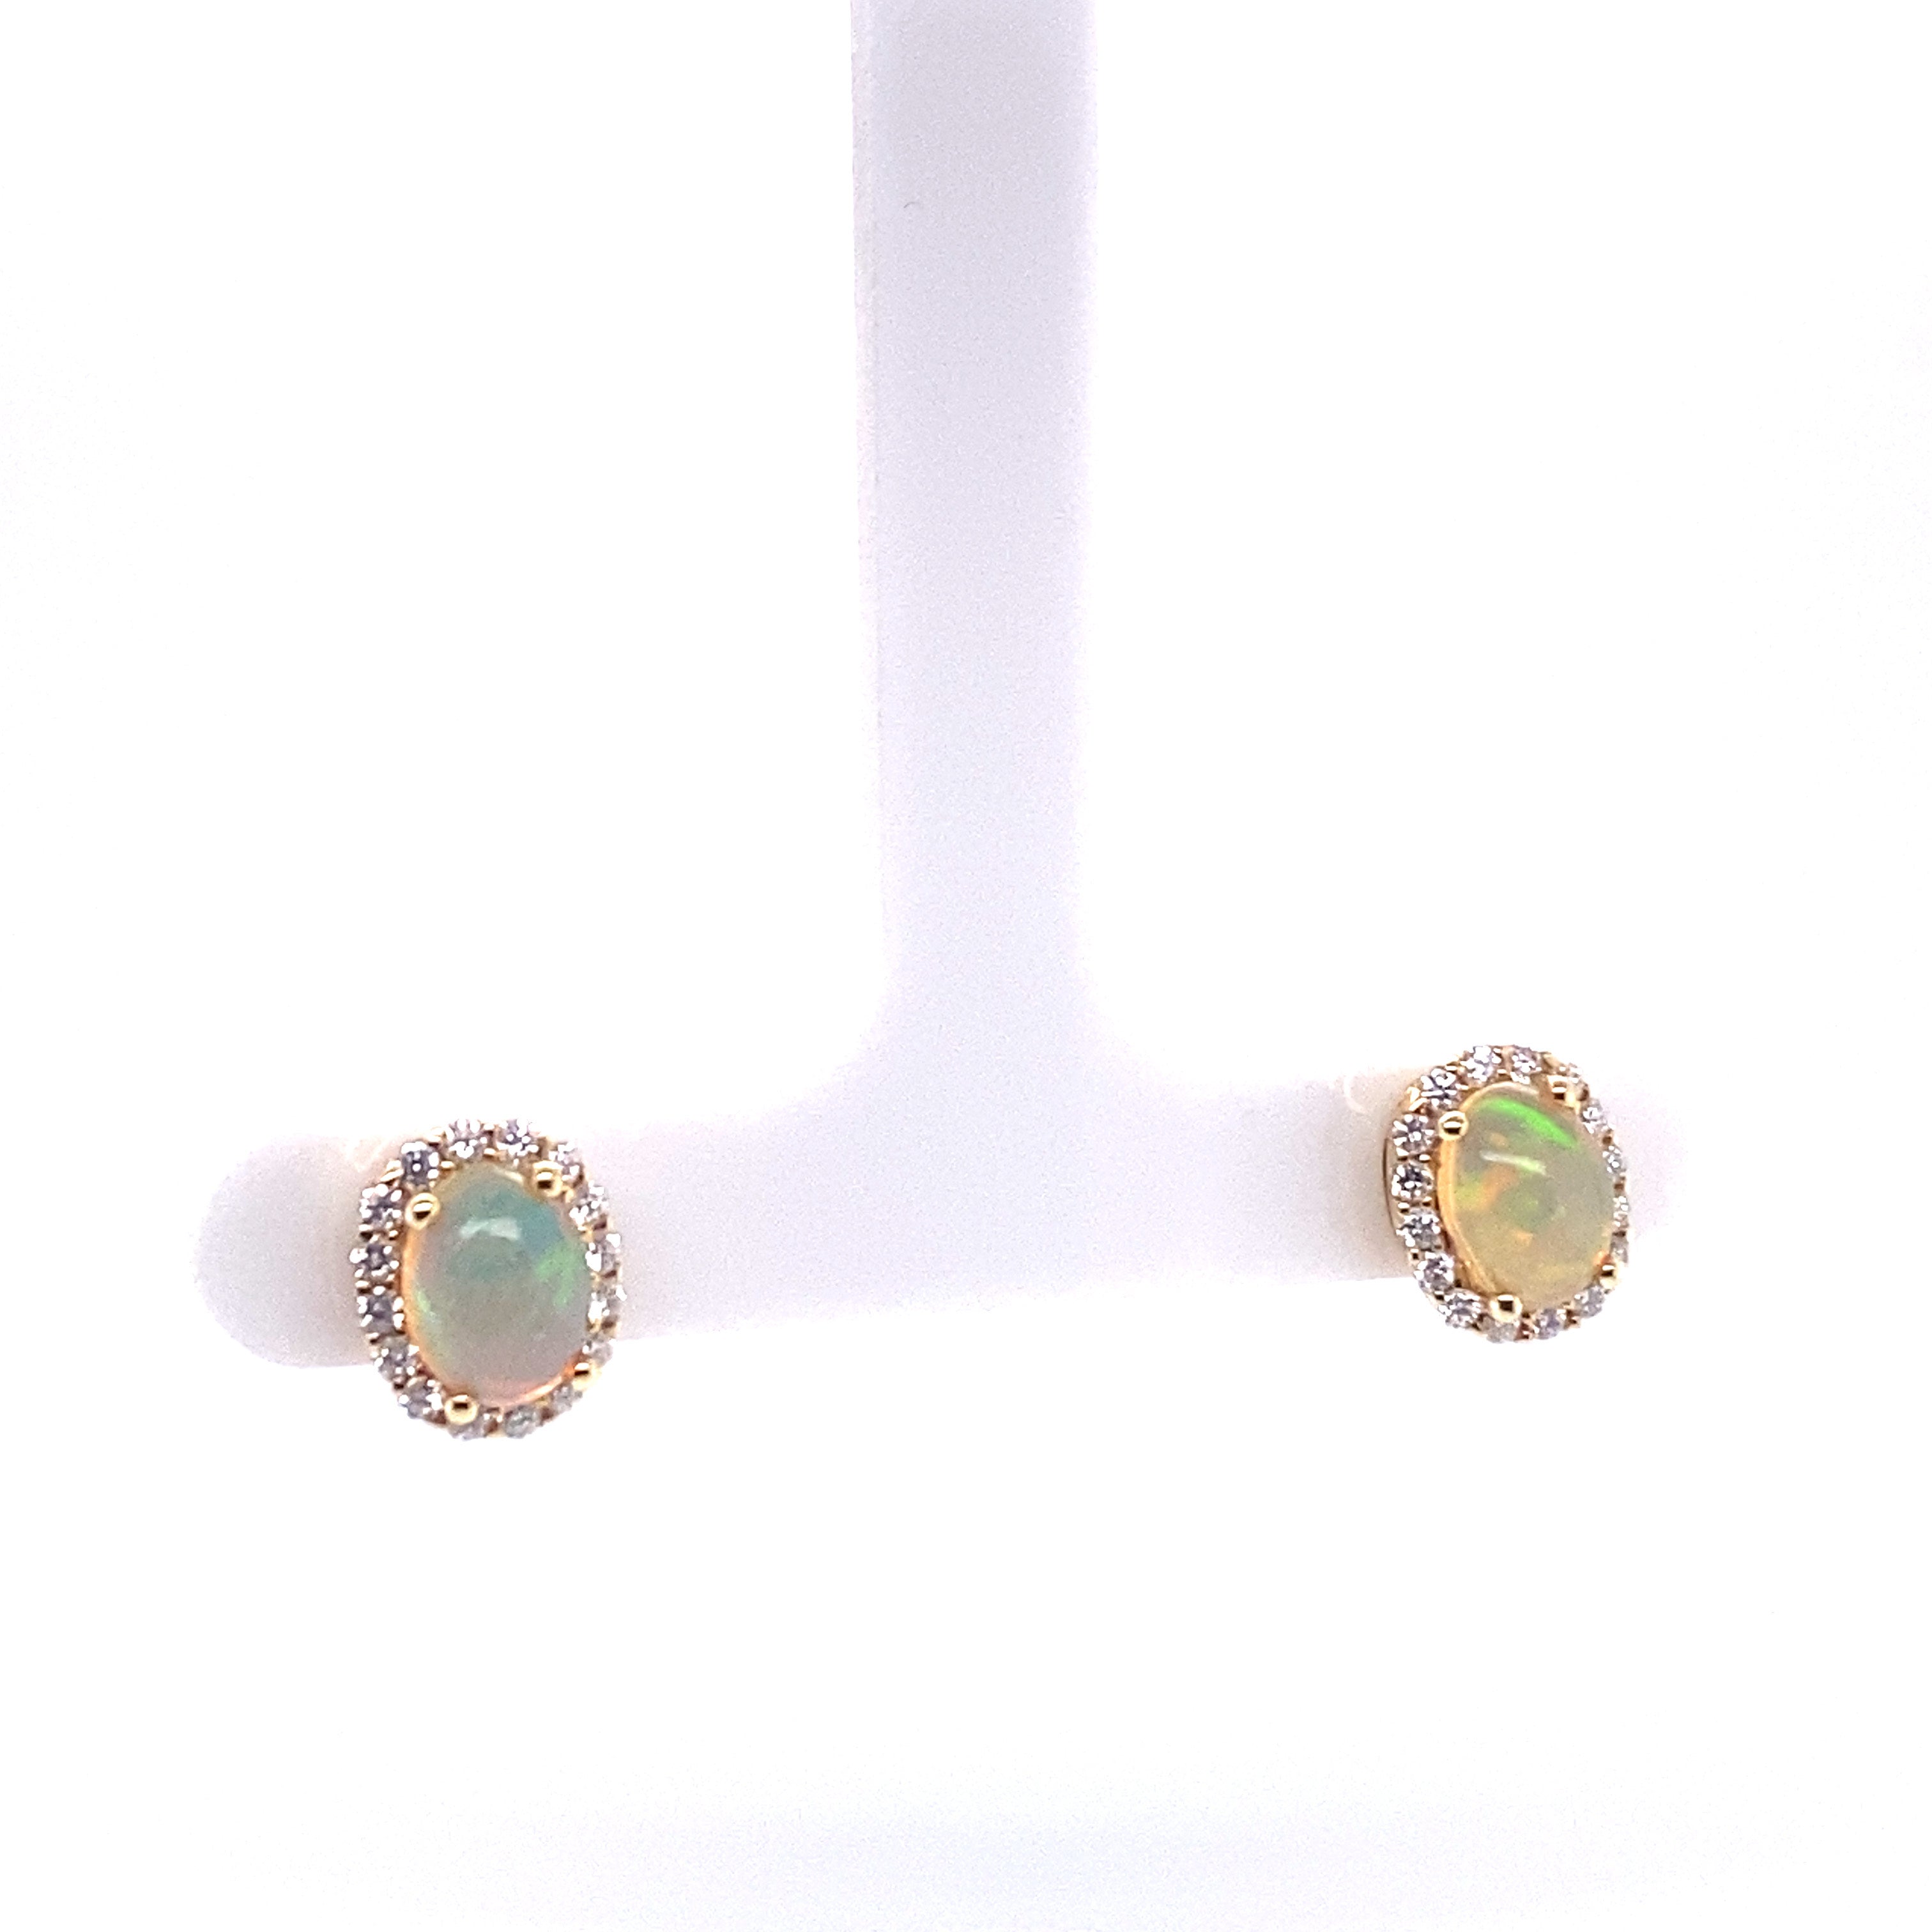 14K Yellow Gold, Opal and Diamond Post Earrings (360 done)